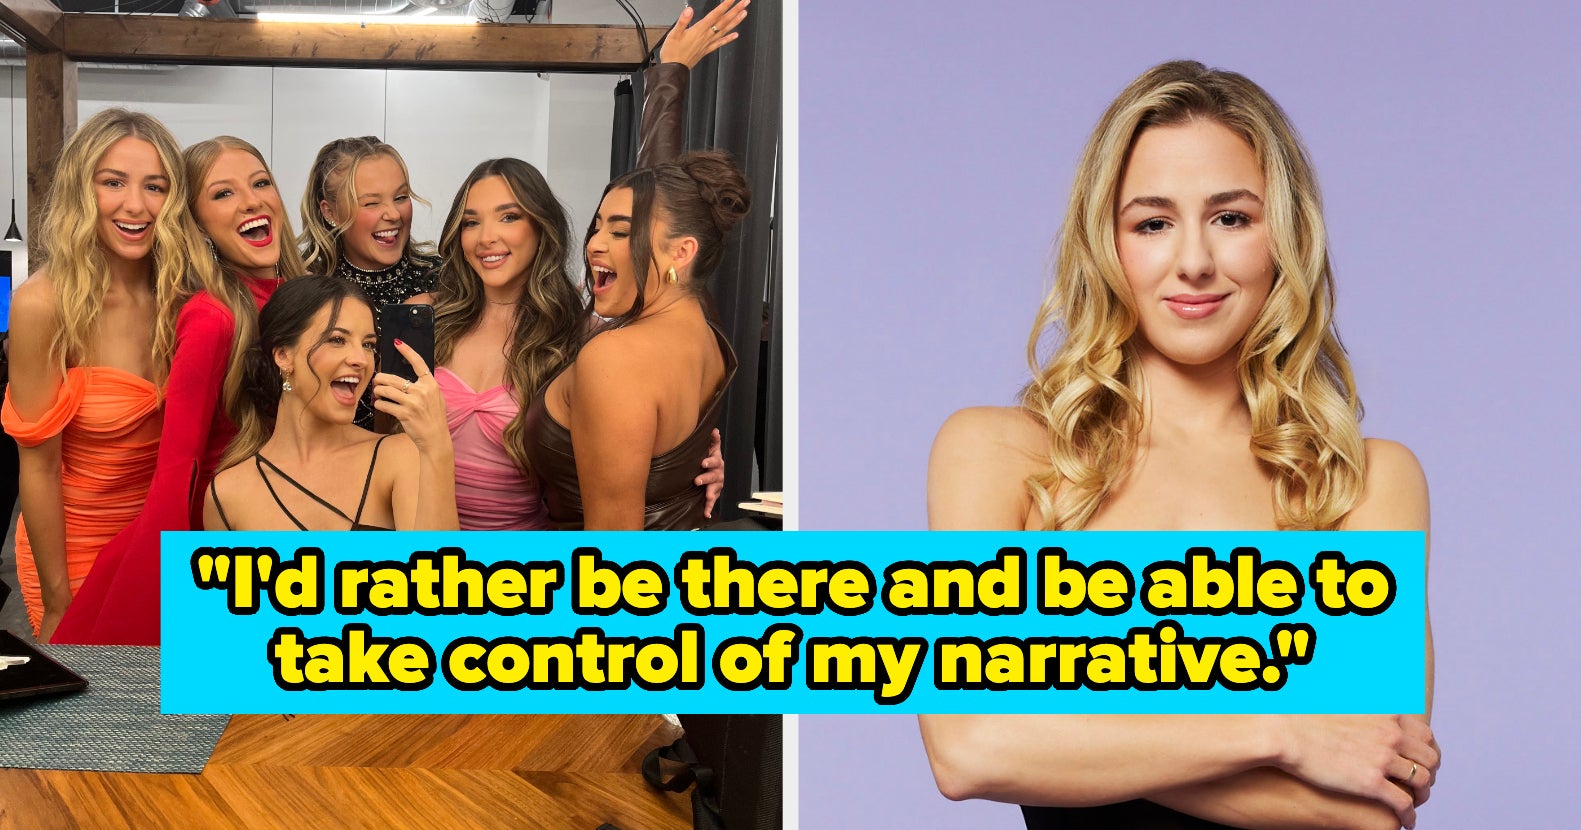 Chloé And Christi Lukasiak On Life During "Dance Moms," Their Relationship With Each Other, And Why They Returned For The Show's Reunion